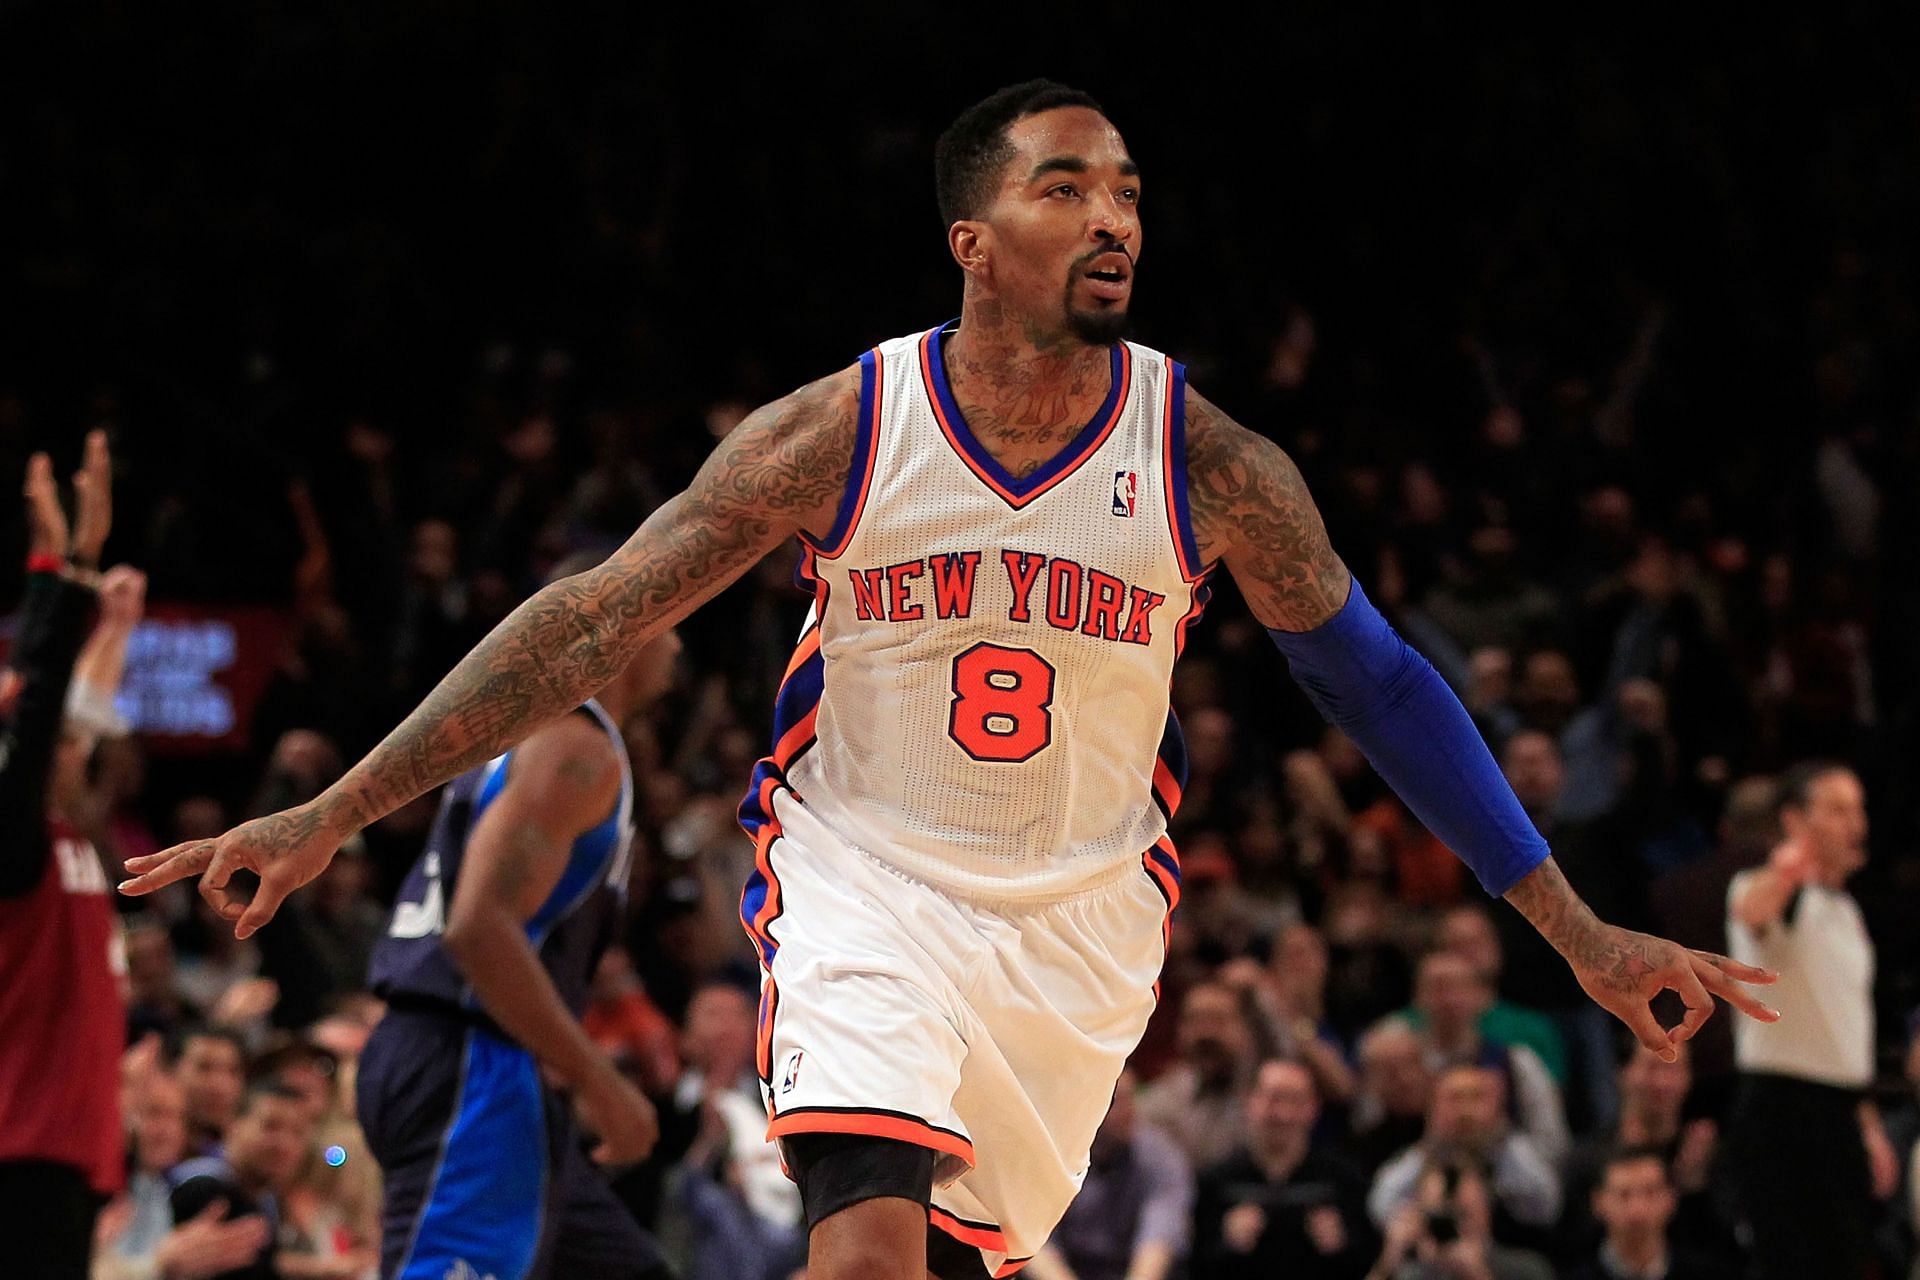 J.R. Smith is one of the most outspoken NBA players of all time (Image via Getty Images)